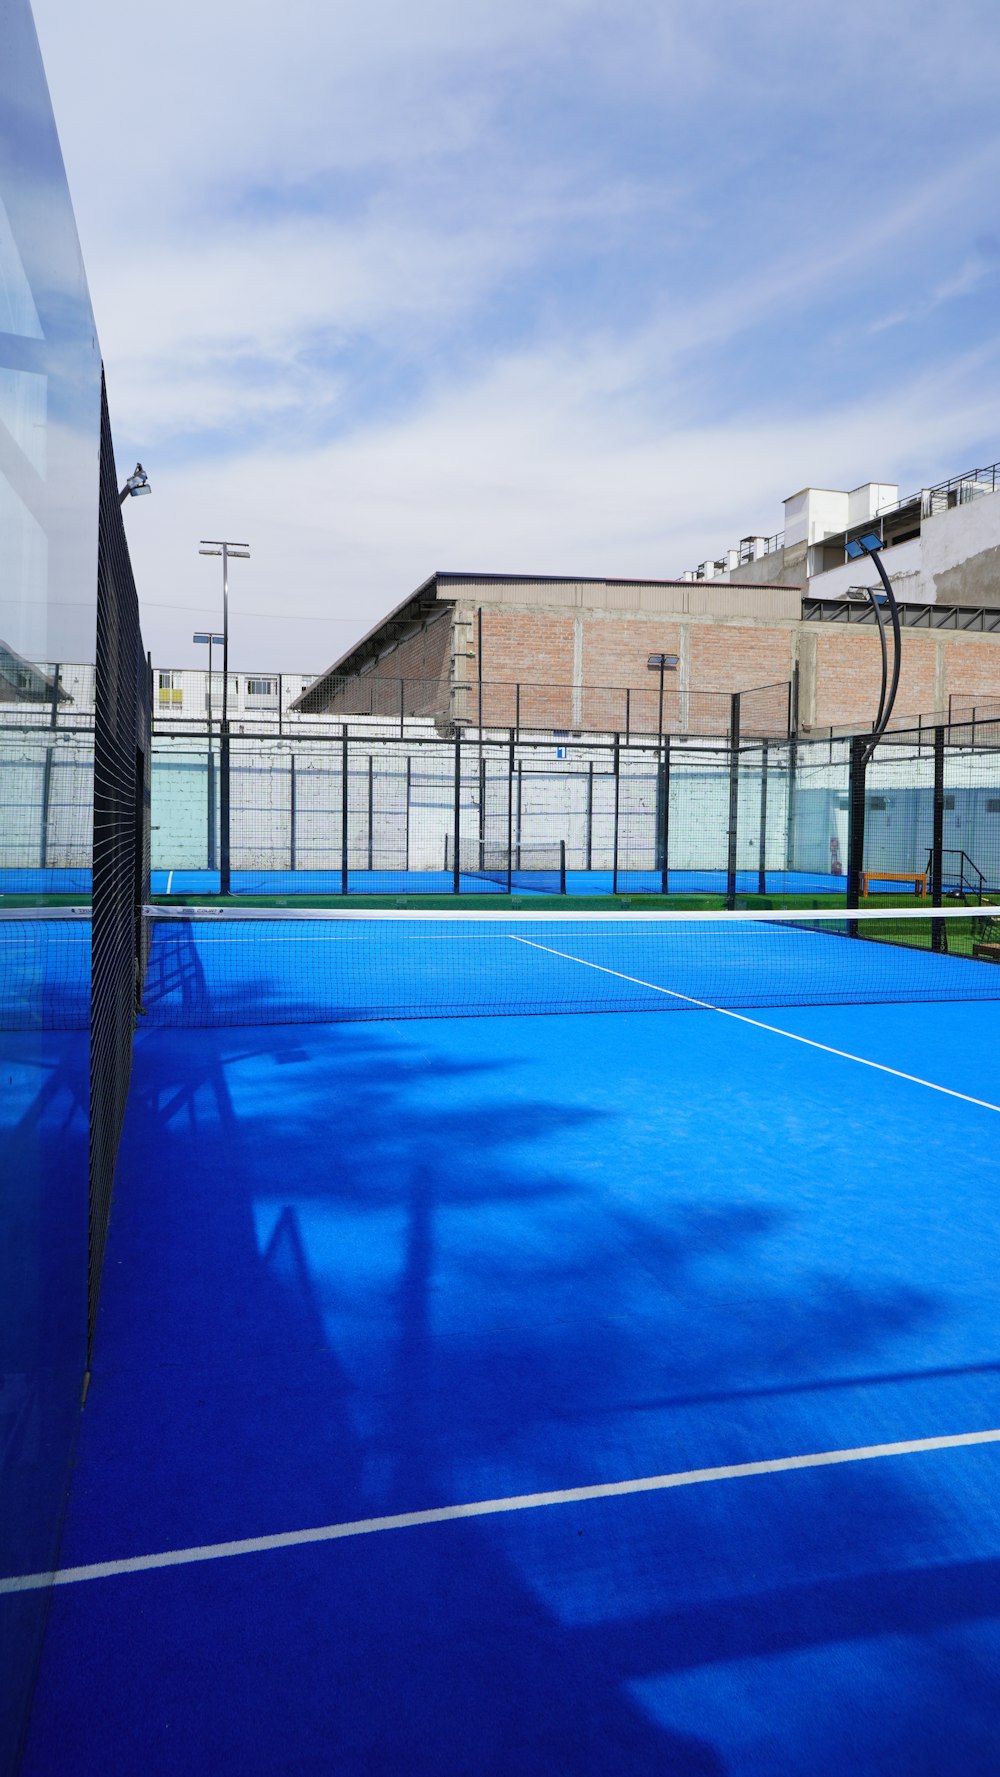 a tennis court with a blue surface and white lines